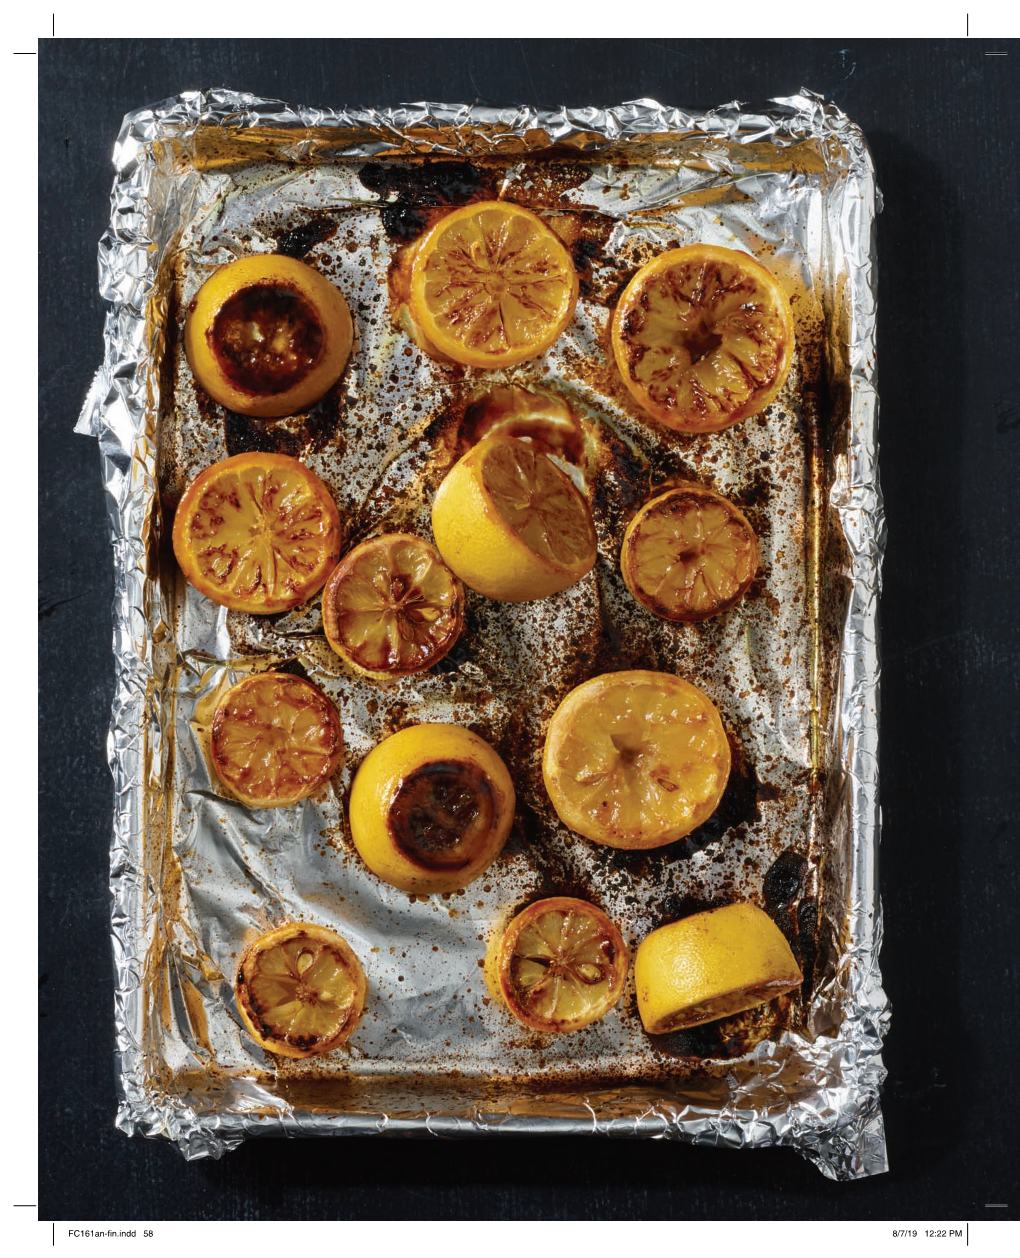 Roasted Lemons a Simple Technique Brings out Rich Sweetness and Imparts Caramelized Complexity to the Flavor of the Lemon